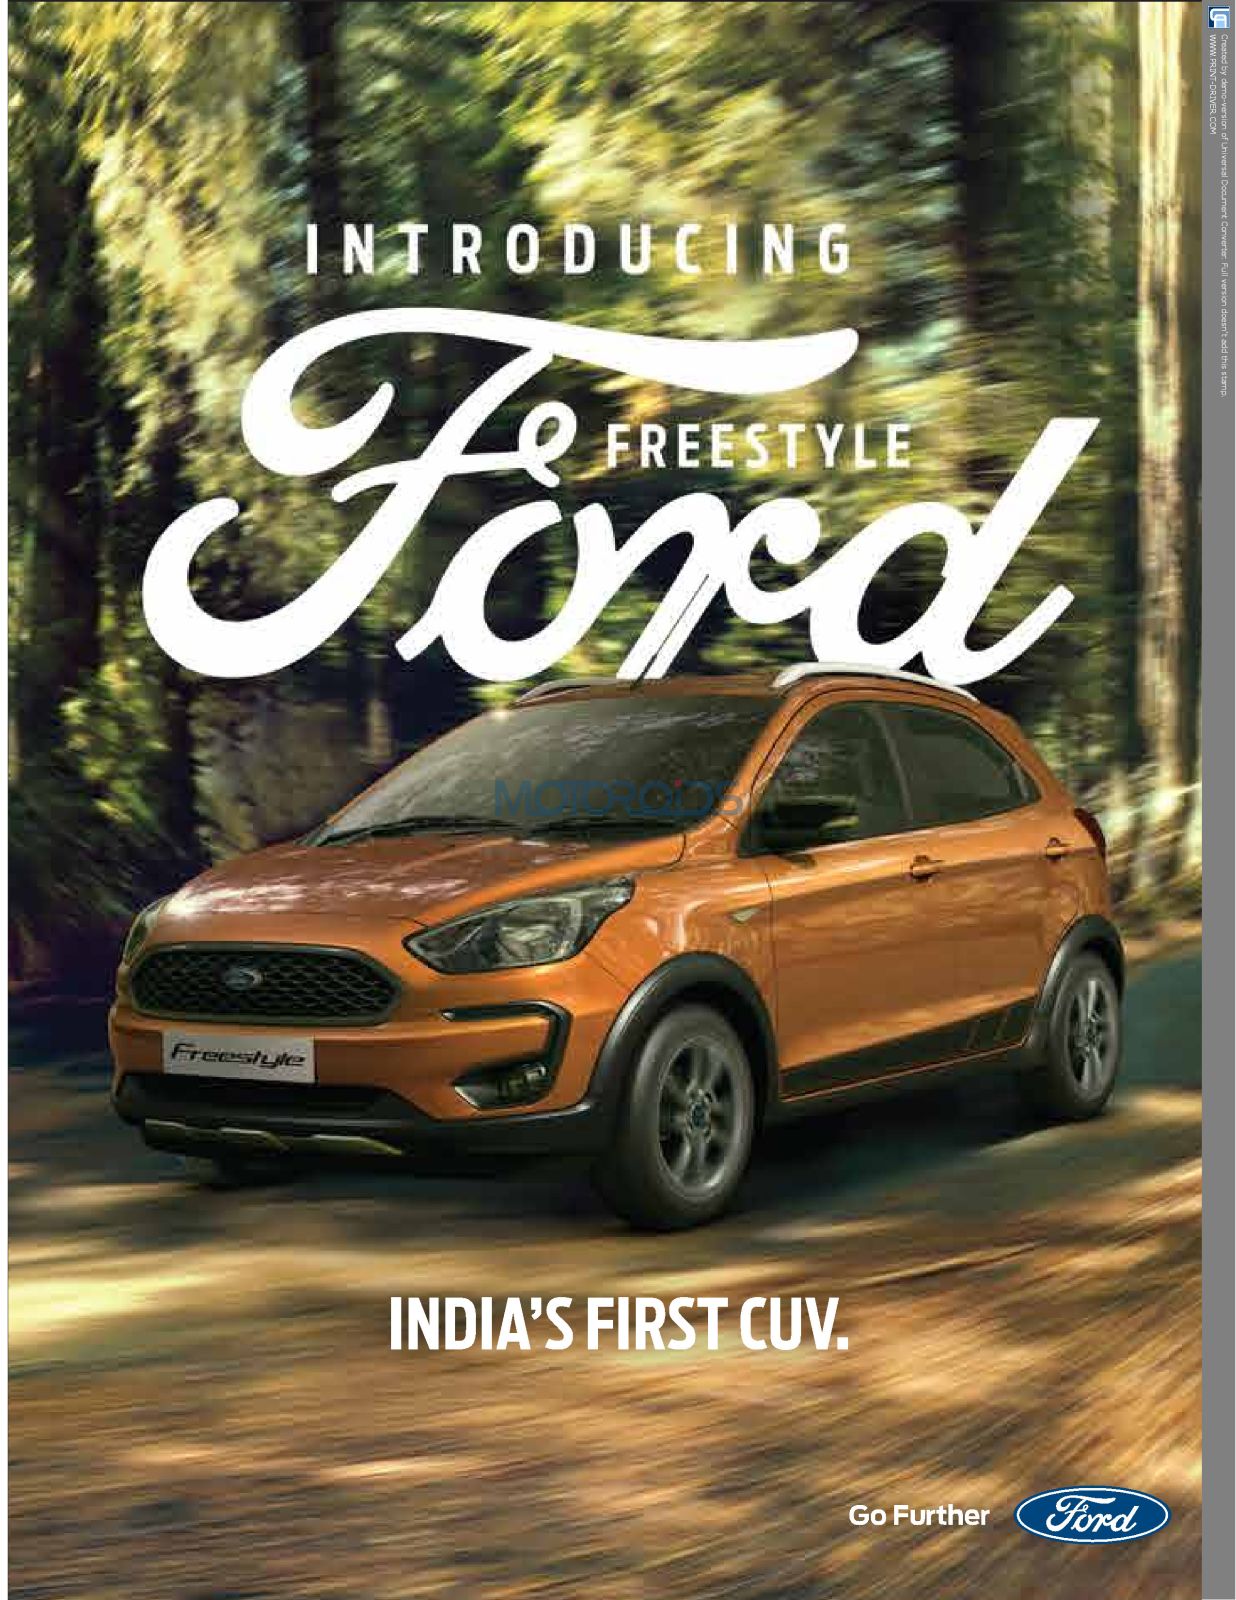 Ford Freestyle Brochure